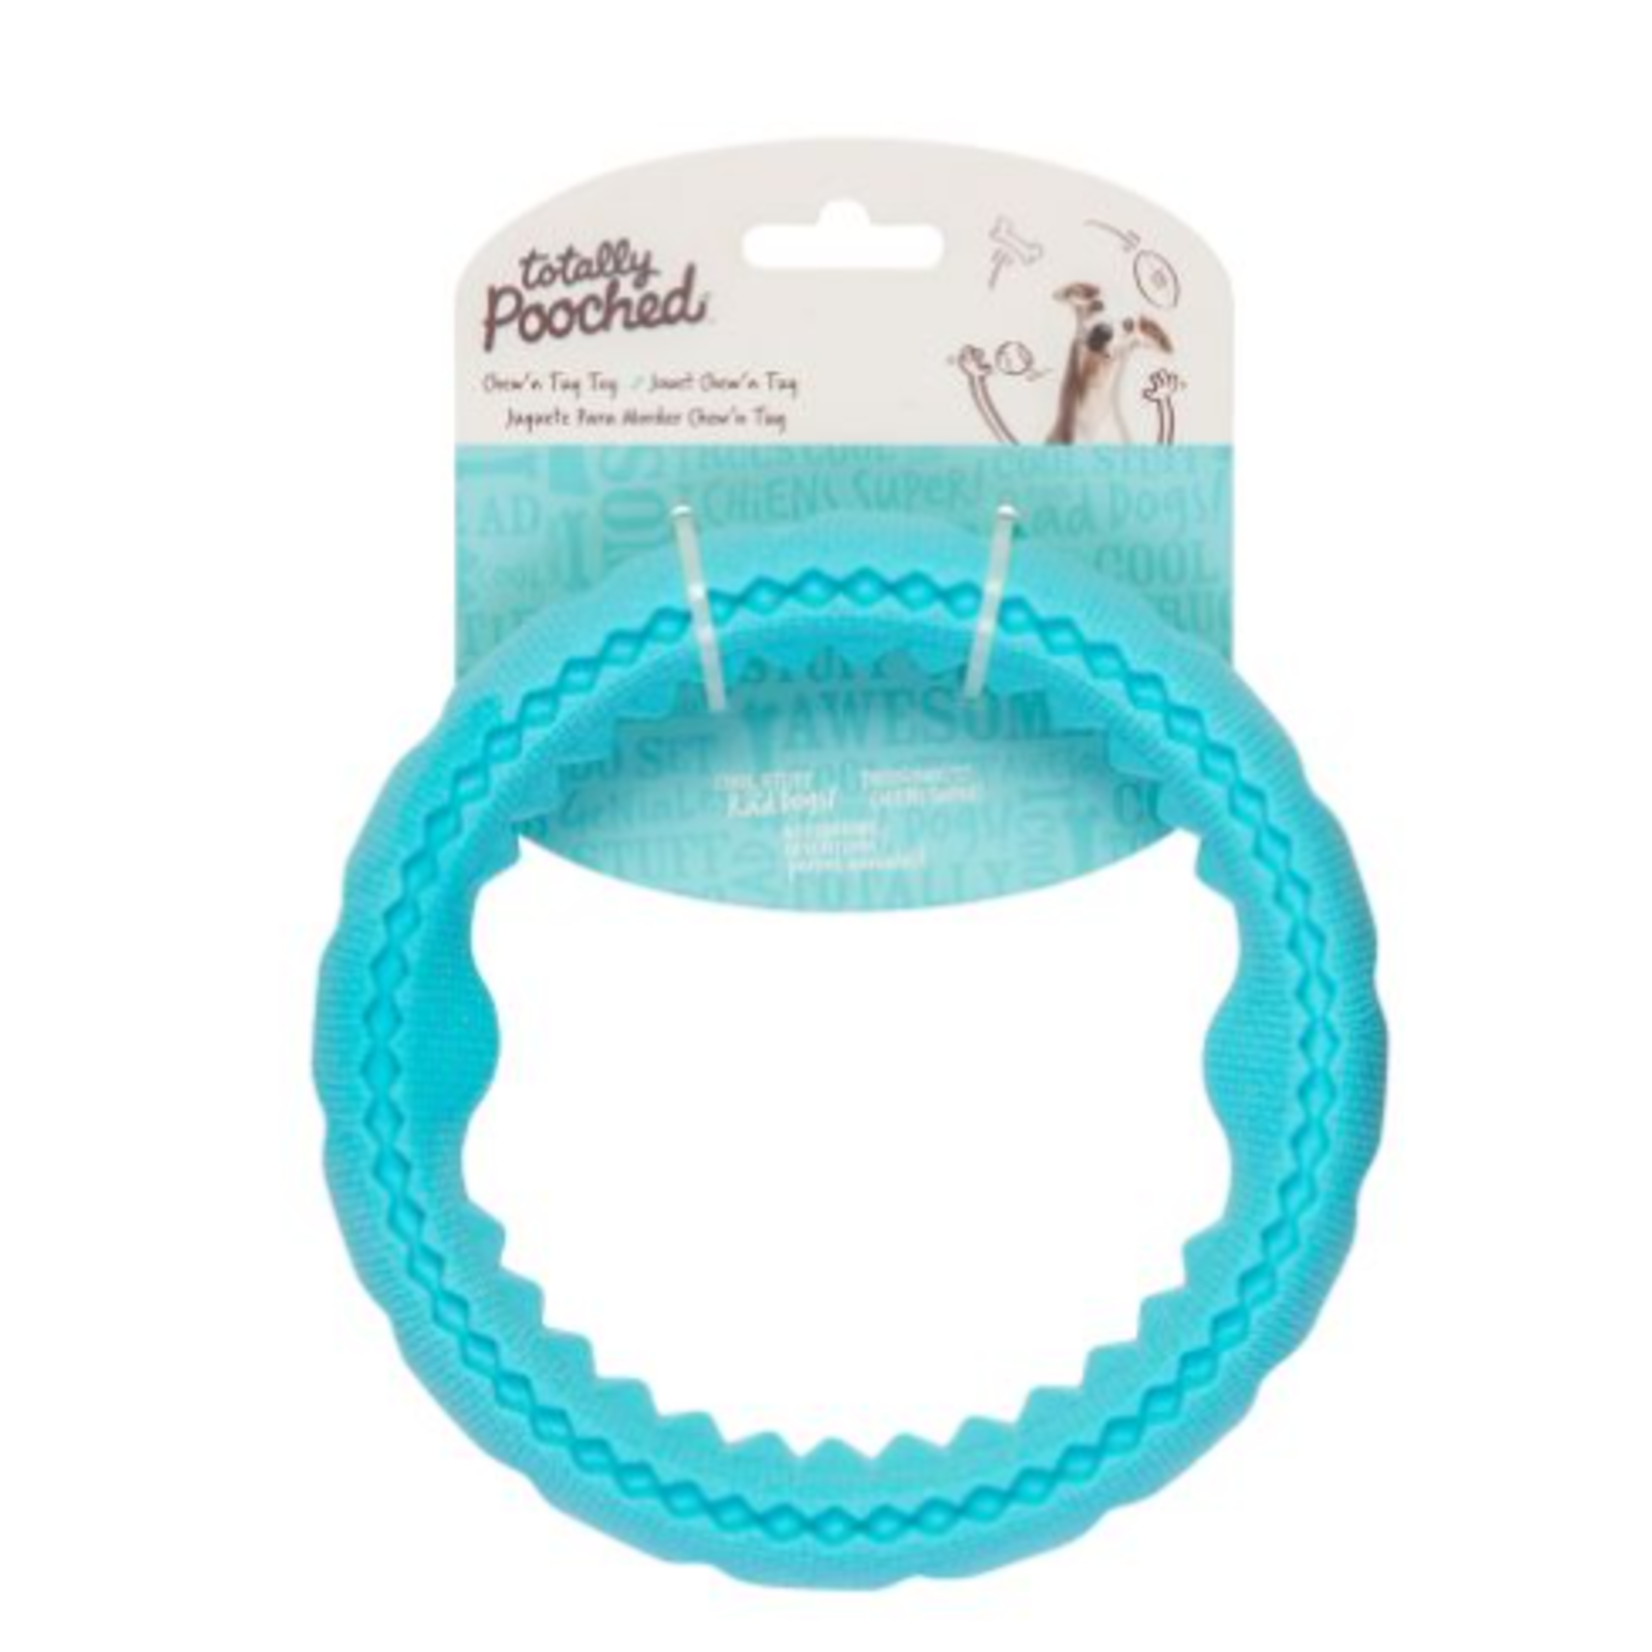 Messy Mutts Totally Pooched - Chew N' Tug - Rubber Toy - Ring - 6,5 in - Blue